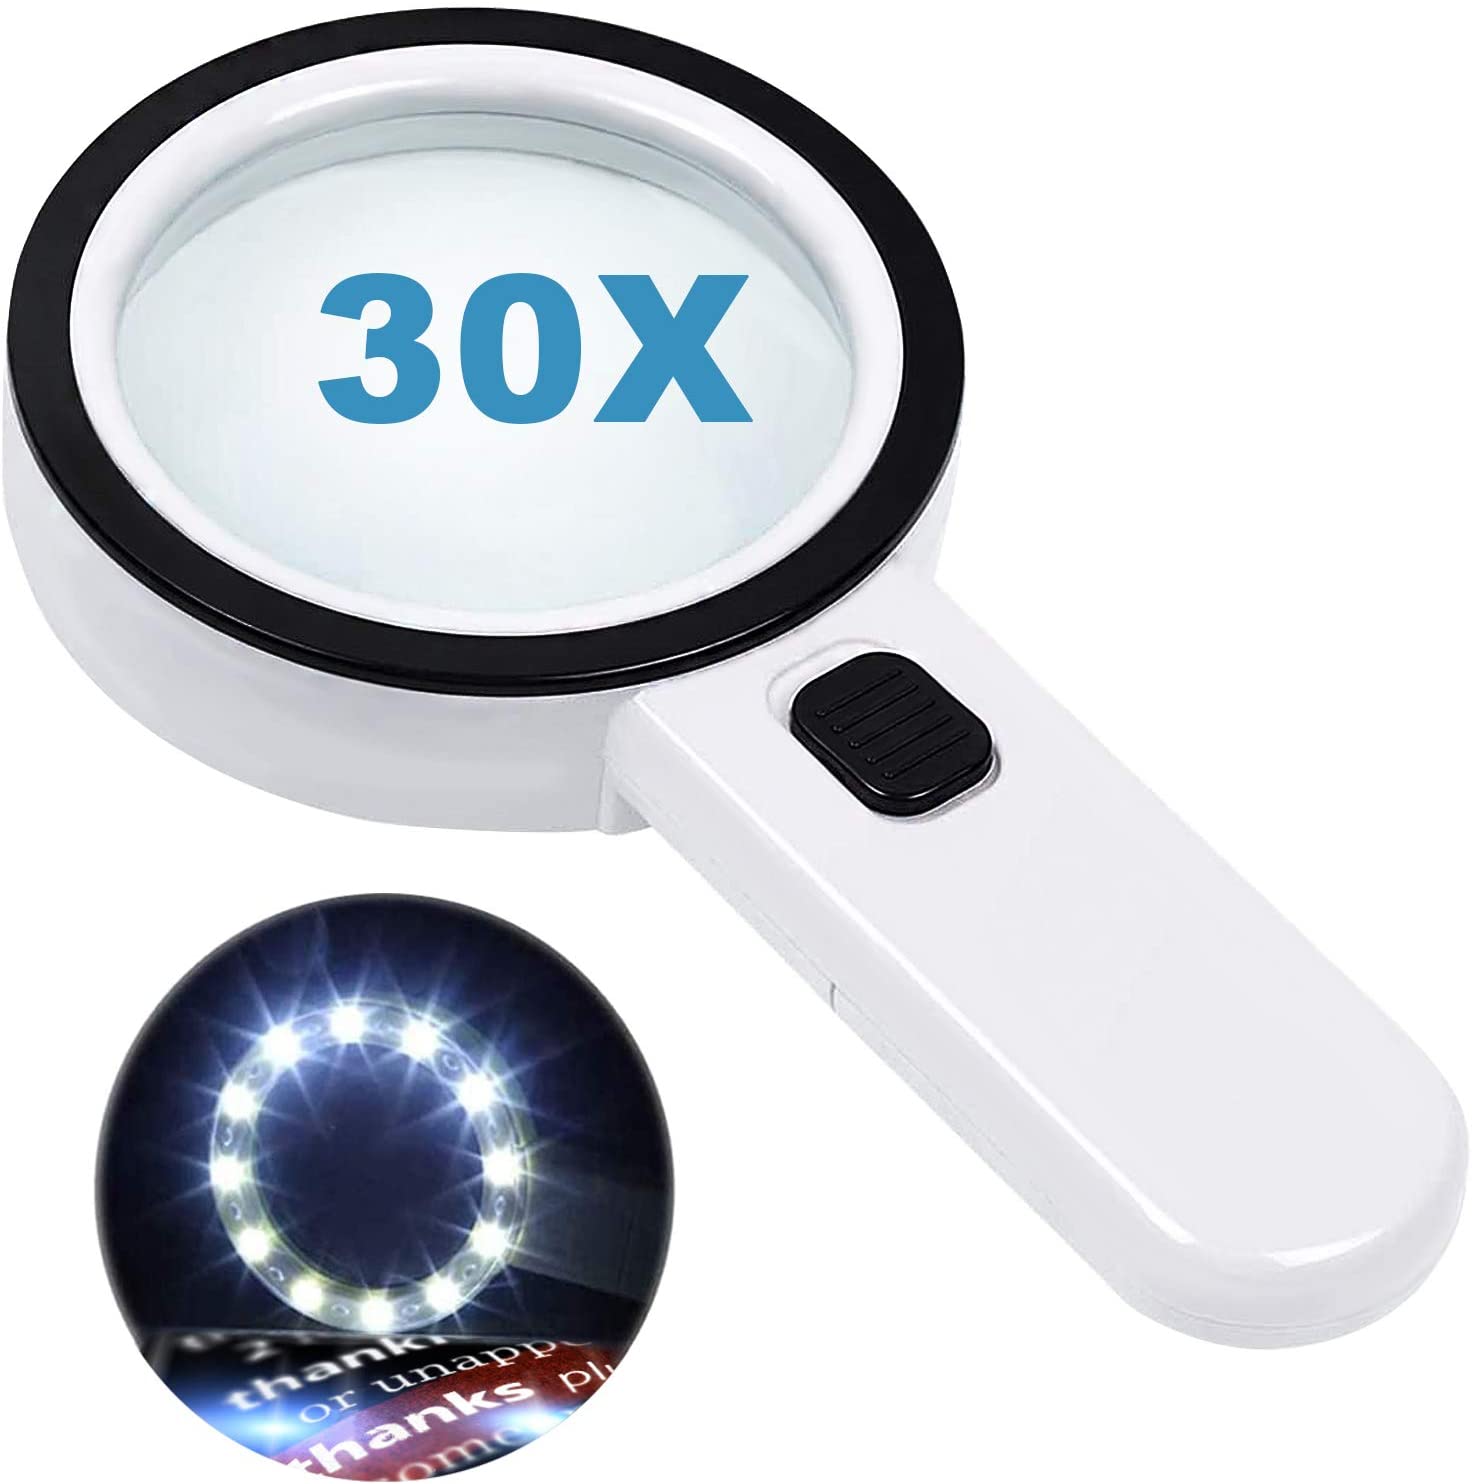 Nazano, Magnifying Glass with 12 LED Lights, 30X Double Glass Lens Handheld Illuminated Magnifier Reading Magnifying Glass with for Seniors Read, Coins, Stamps, Map, Inspection, Macular Degeneration